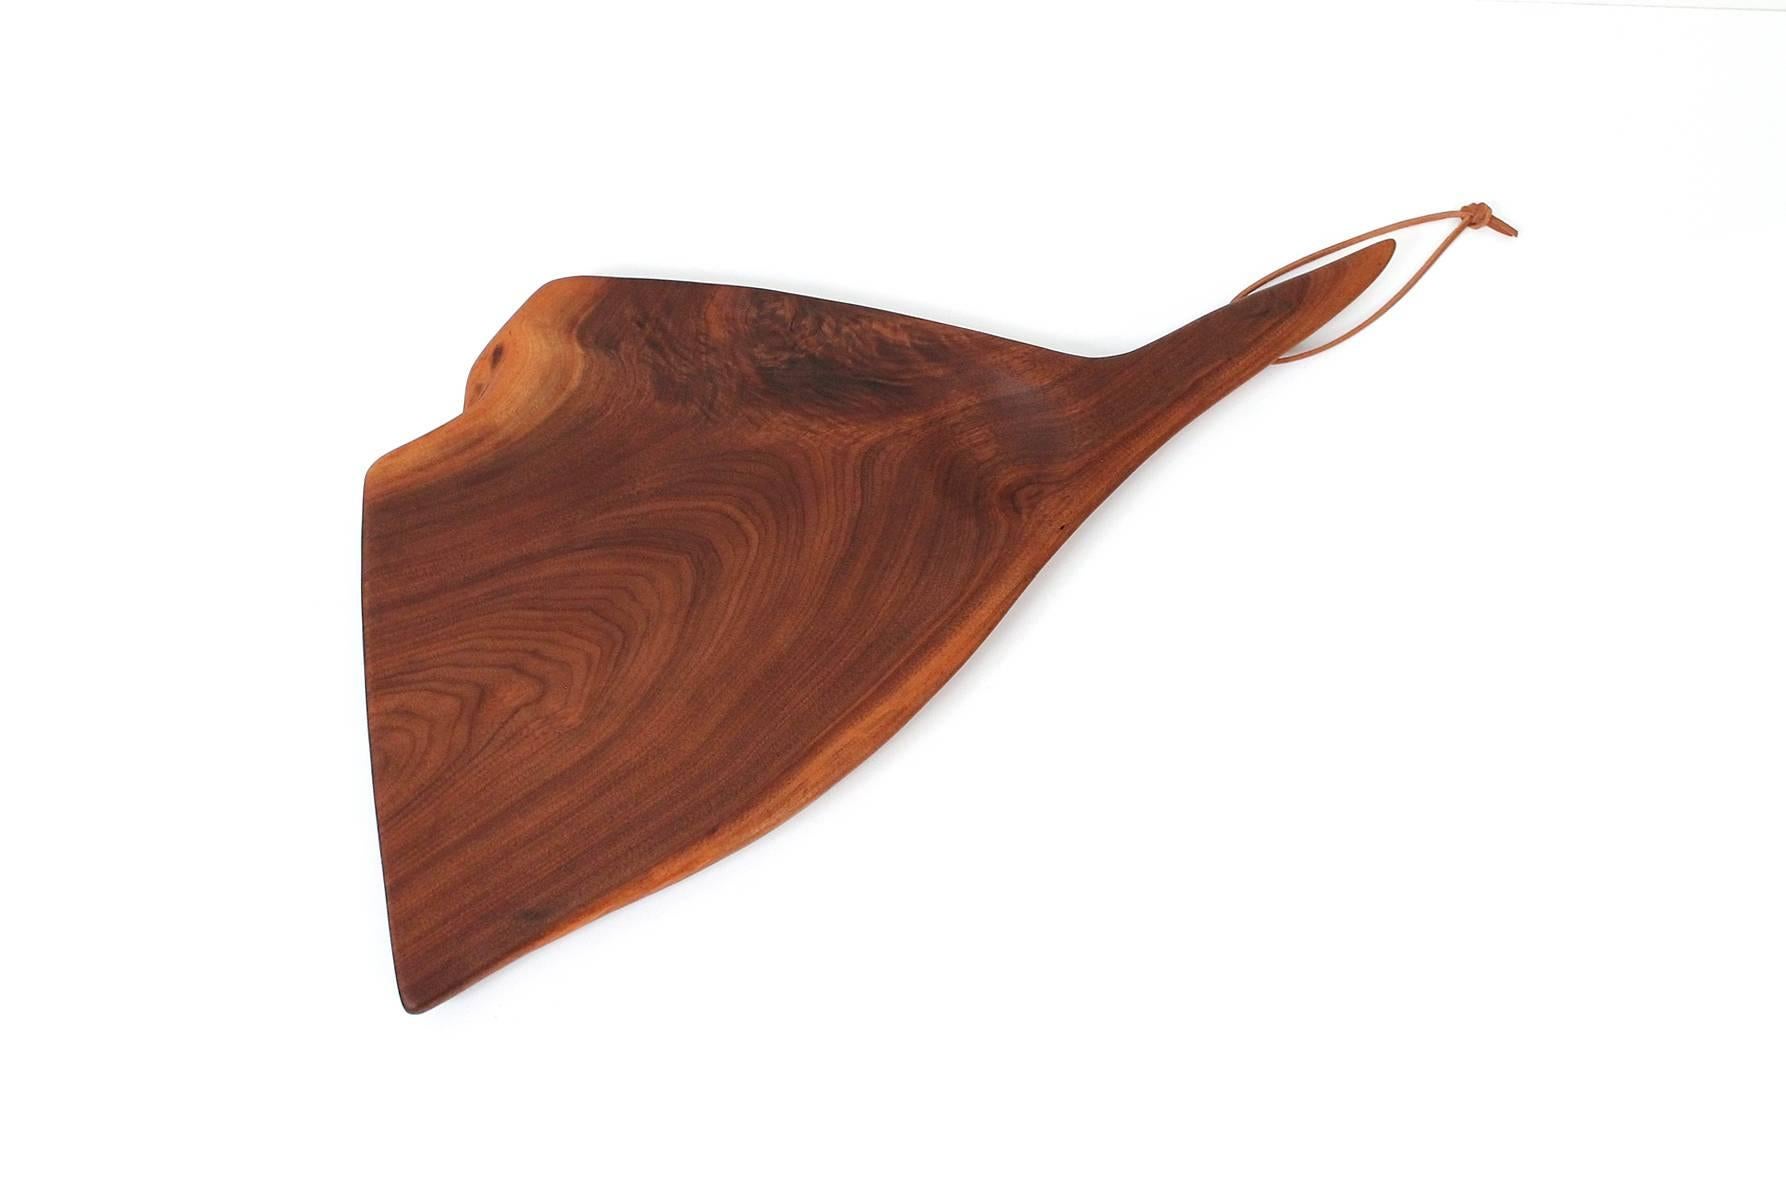 Rare cutting board in walnut by American studio furniture maker Dirk Rosse. Sculptural and considered form inspired by the cutting boards of Wharton Esherick. Rosse was born in the US, raised in Holland, and settled in Millbrook, NY where he crafted